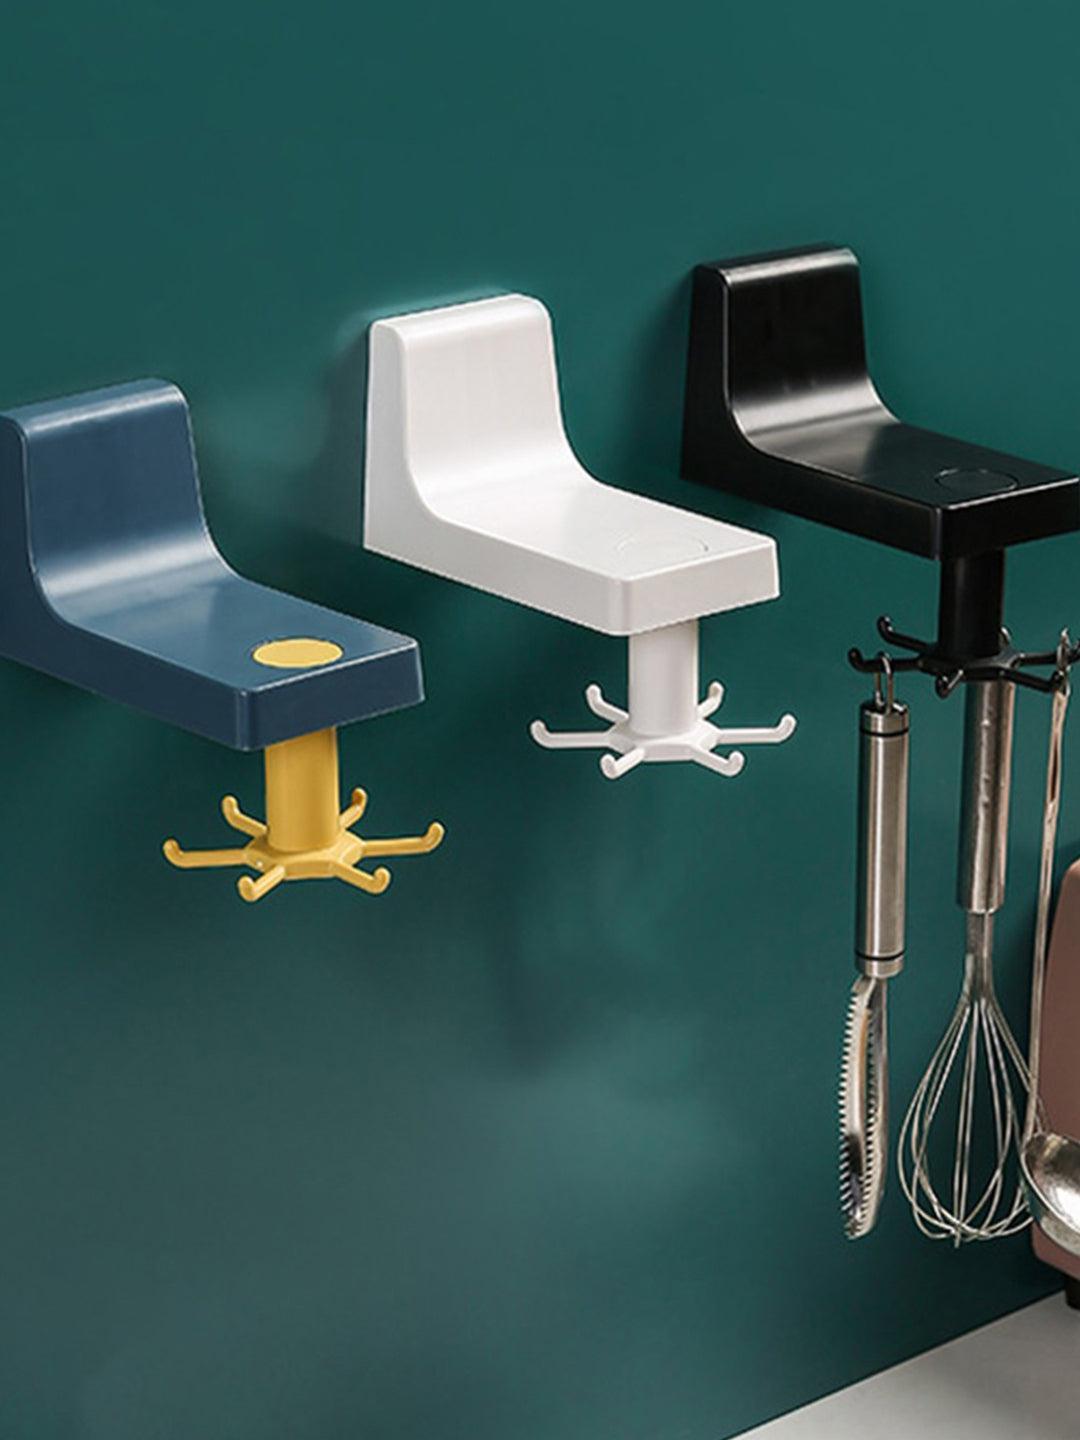 Buy Wall Hooks Online in India at Best Price @Upto 70% OFF – MARKET99